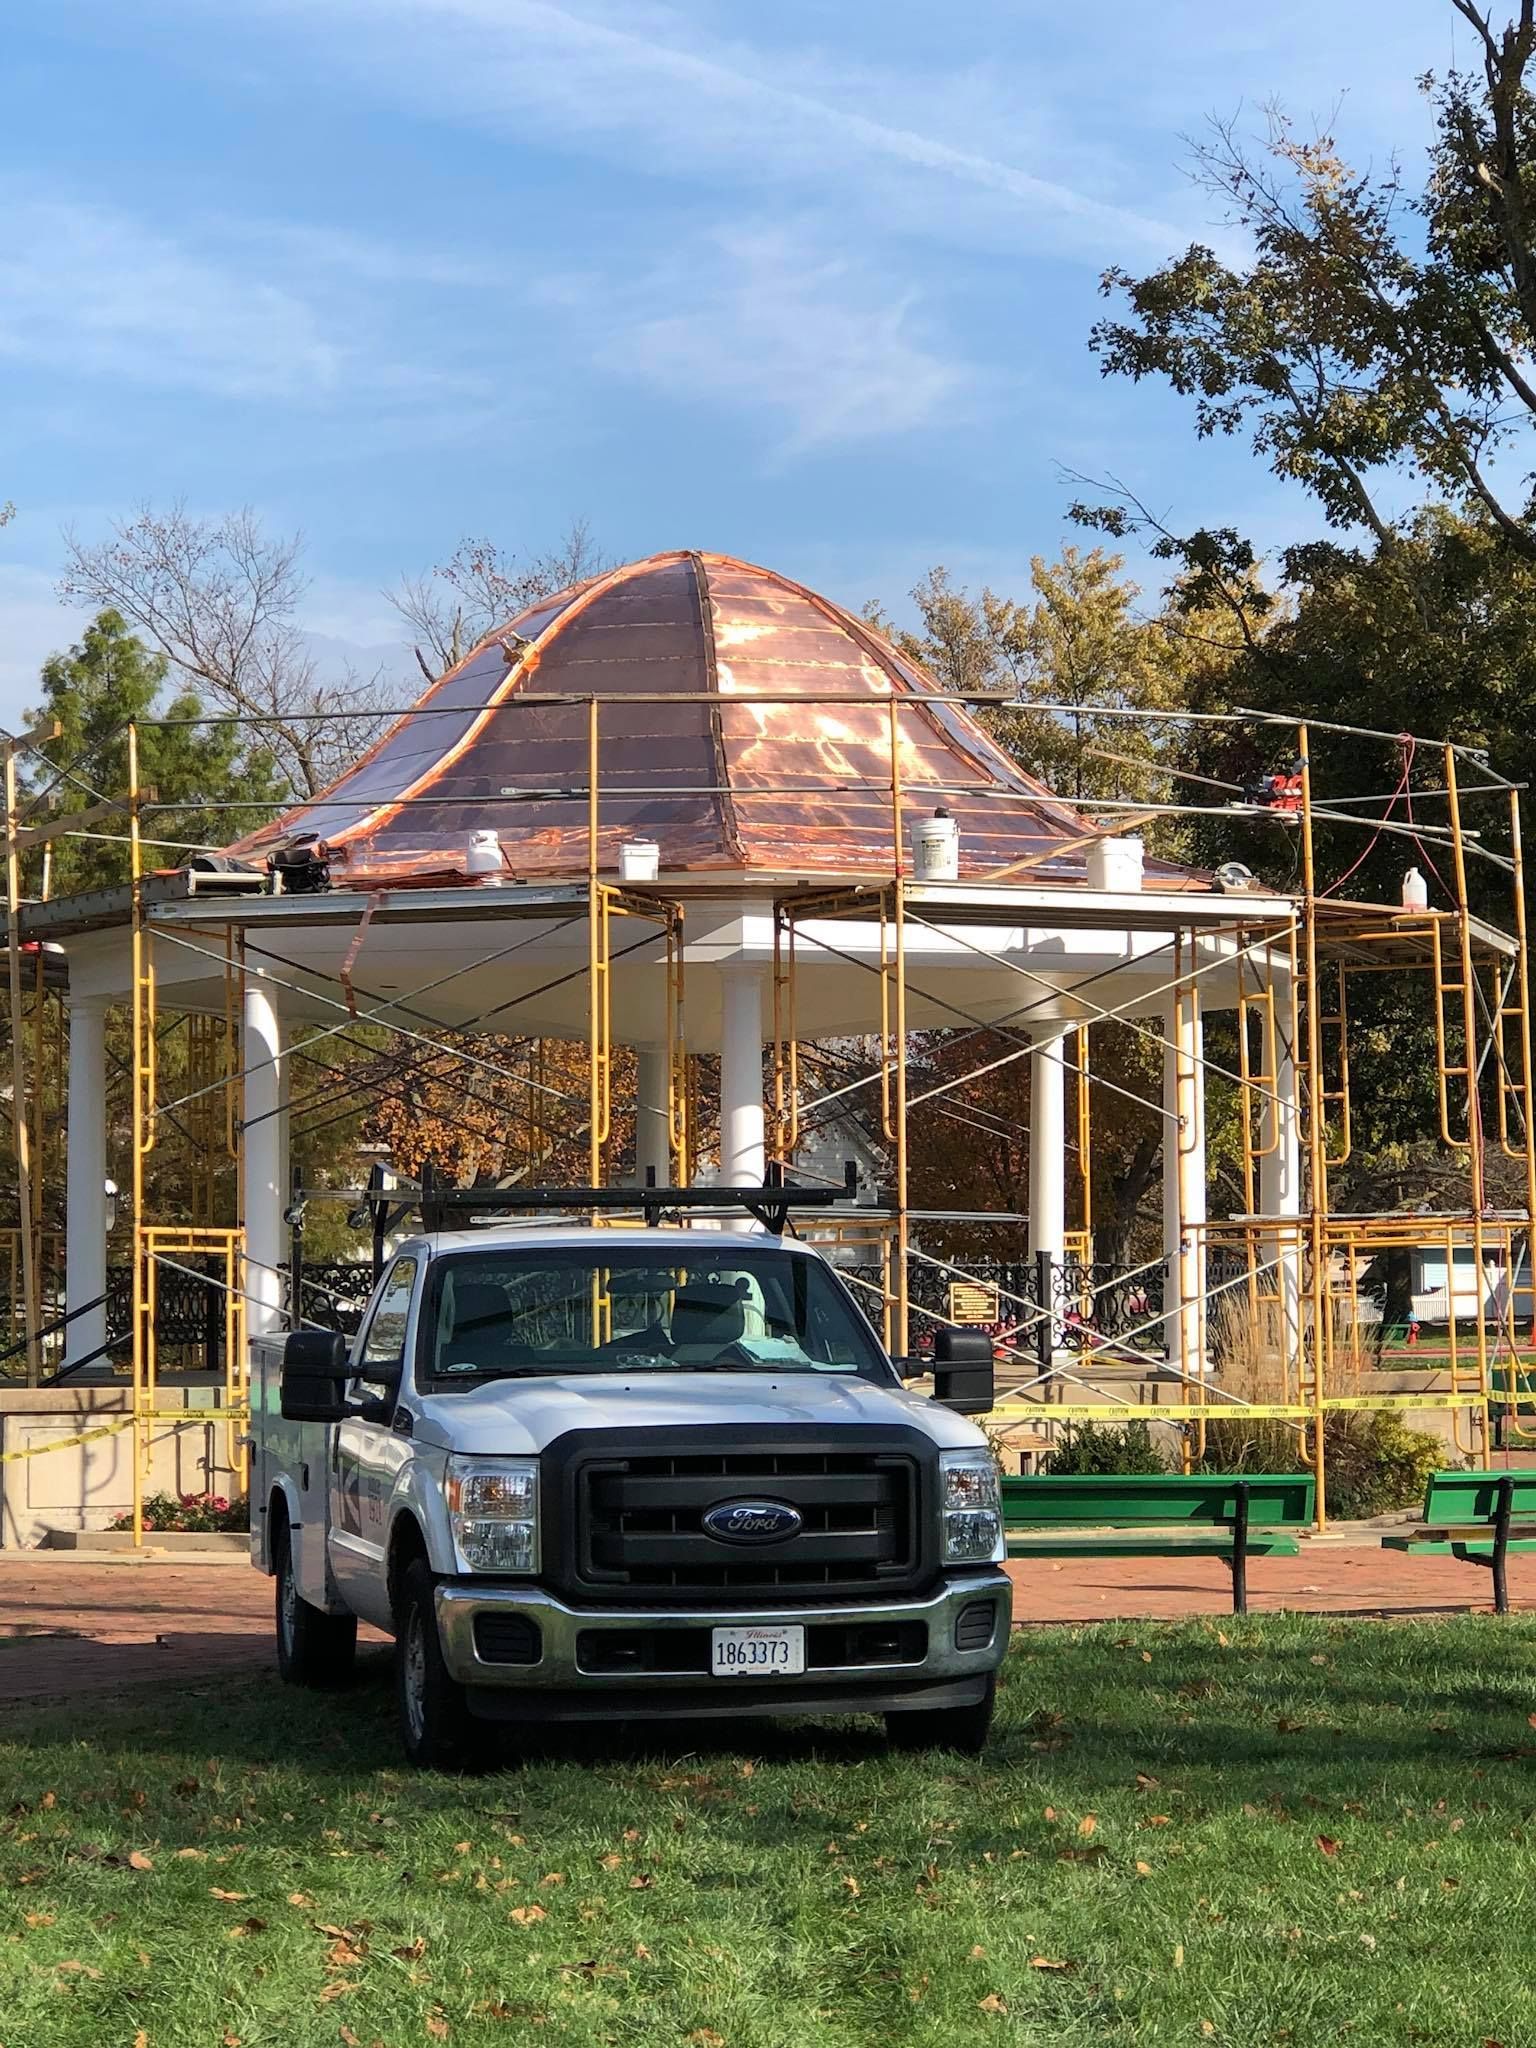 Elegant and expert precision on a copper belle gazebos